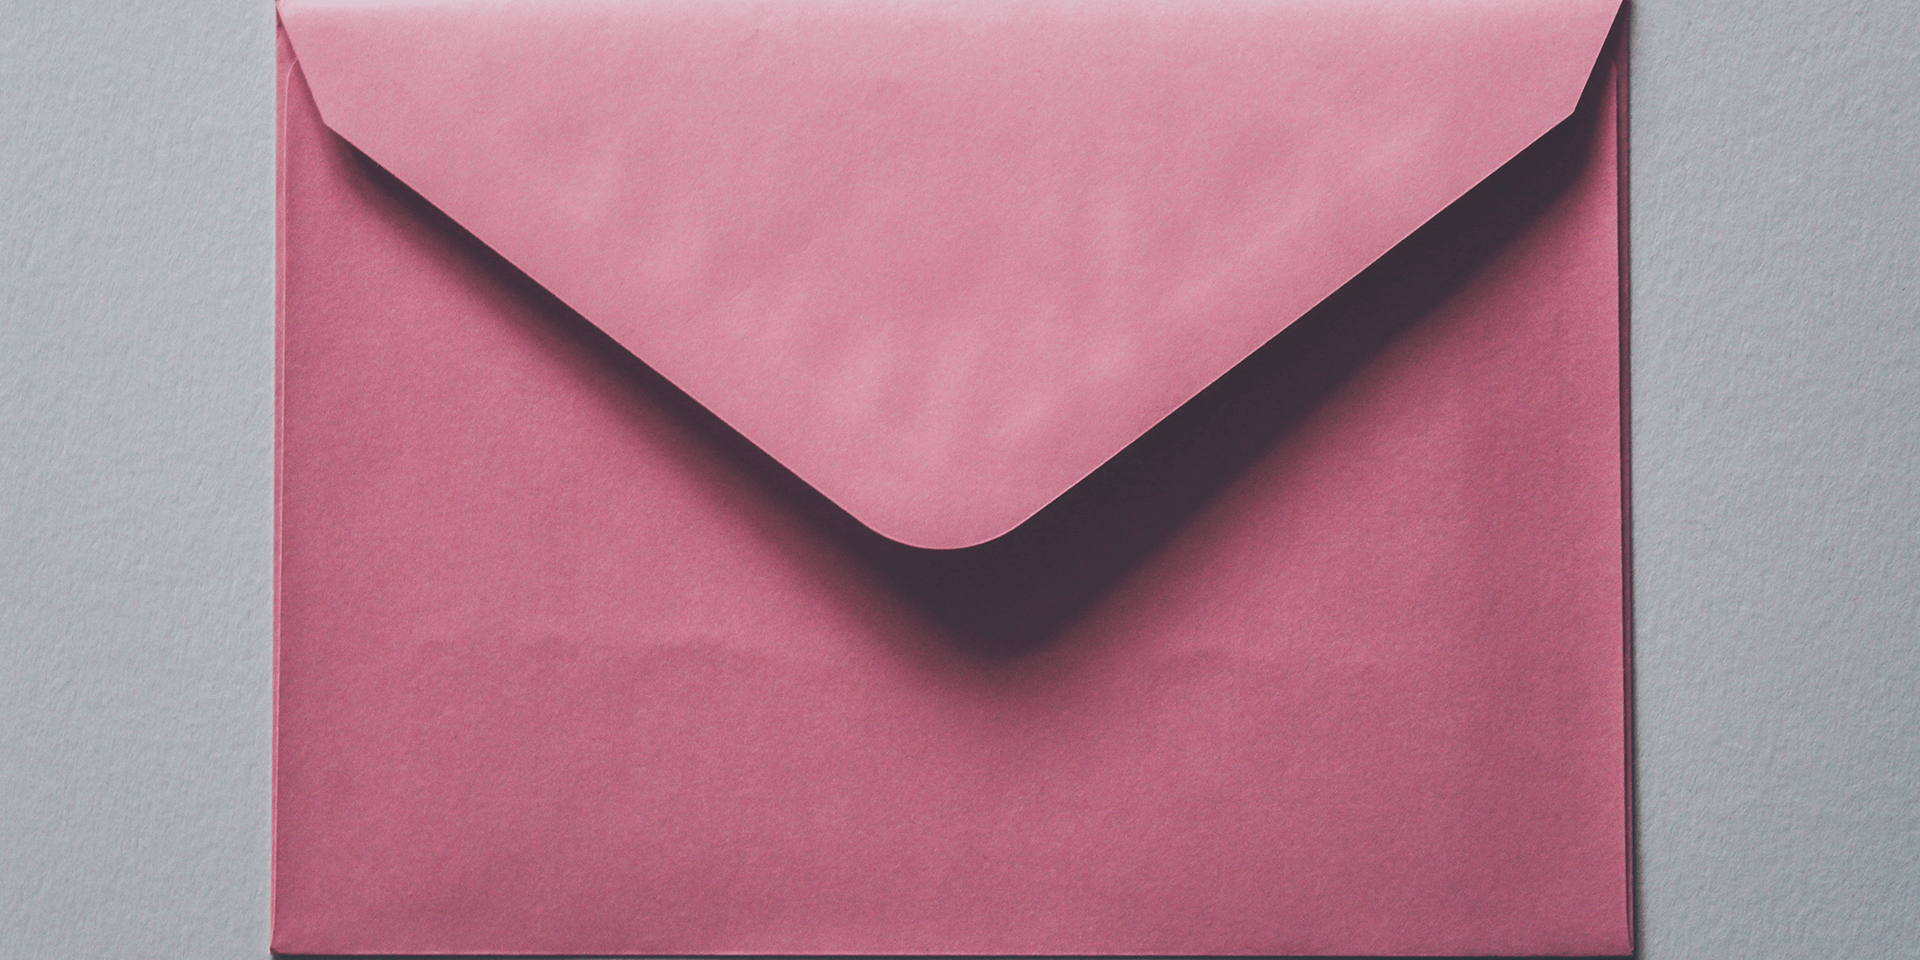 A pink envelope on a gray background.